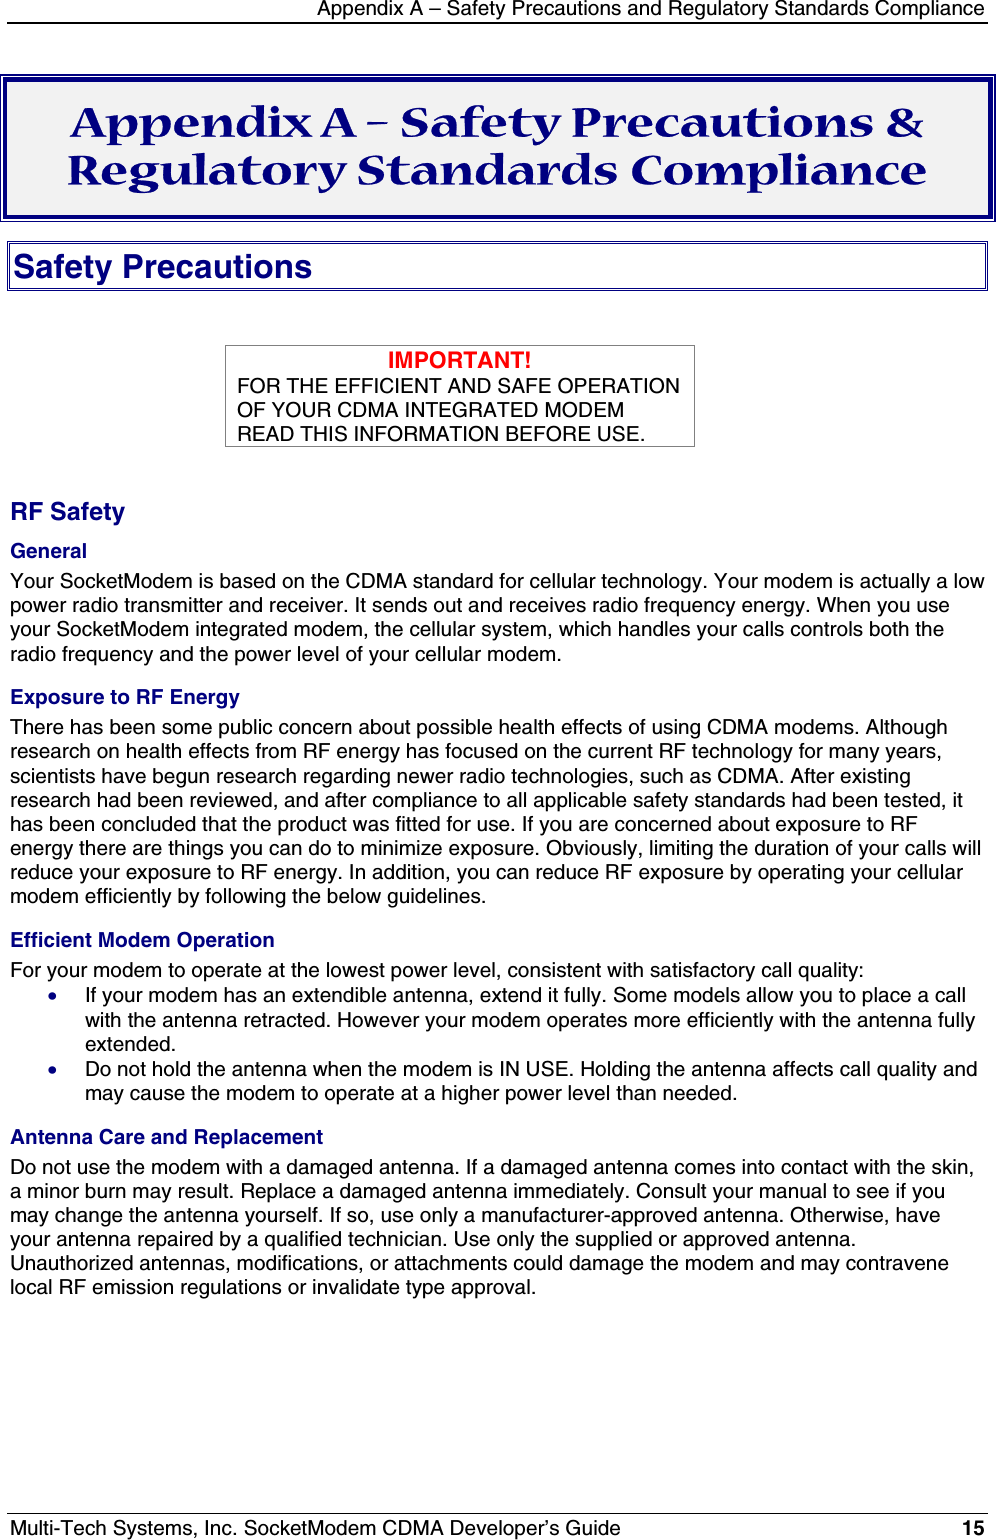 Appendix A – Safety Precautions and Regulatory Standards ComplianceMulti-Tech Systems, Inc. SocketModem CDMA Developer’s Guide 15Appendix A – Safety Precautions &amp;Regulatory Standards ComplianceSafety PrecautionsIMPORTANT!FOR THE EFFICIENT AND SAFE OPERATIONOF YOUR CDMA INTEGRATED MODEMREAD THIS INFORMATION BEFORE USE.RF SafetyGeneralYour SocketModem is based on the CDMA standard for cellular technology. Your modem is actually a lowpower radio transmitter and receiver. It sends out and receives radio frequency energy. When you useyour SocketModem integrated modem, the cellular system, which handles your calls controls both theradio frequency and the power level of your cellular modem.Exposure to RF EnergyThere has been some public concern about possible health effects of using CDMA modems. Althoughresearch on health effects from RF energy has focused on the current RF technology for many years,scientists have begun research regarding newer radio technologies, such as CDMA. After existingresearch had been reviewed, and after compliance to all applicable safety standards had been tested, ithas been concluded that the product was fitted for use. If you are concerned about exposure to RFenergy there are things you can do to minimize exposure. Obviously, limiting the duration of your calls willreduce your exposure to RF energy. In addition, you can reduce RF exposure by operating your cellularmodem efficiently by following the below guidelines.Efficient Modem OperationFor your modem to operate at the lowest power level, consistent with satisfactory call quality:· If your modem has an extendible antenna, extend it fully. Some models allow you to place a callwith the antenna retracted. However your modem operates more efficiently with the antenna fullyextended.· Do not hold the antenna when the modem is IN USE. Holding the antenna affects call quality andmay cause the modem to operate at a higher power level than needed.Antenna Care and ReplacementDo not use the modem with a damaged antenna. If a damaged antenna comes into contact with the skin,a minor burn may result. Replace a damaged antenna immediately. Consult your manual to see if youmay change the antenna yourself. If so, use only a manufacturer-approved antenna. Otherwise, haveyour antenna repaired by a qualified technician. Use only the supplied or approved antenna.Unauthorized antennas, modifications, or attachments could damage the modem and may contravenelocal RF emission regulations or invalidate type approval.